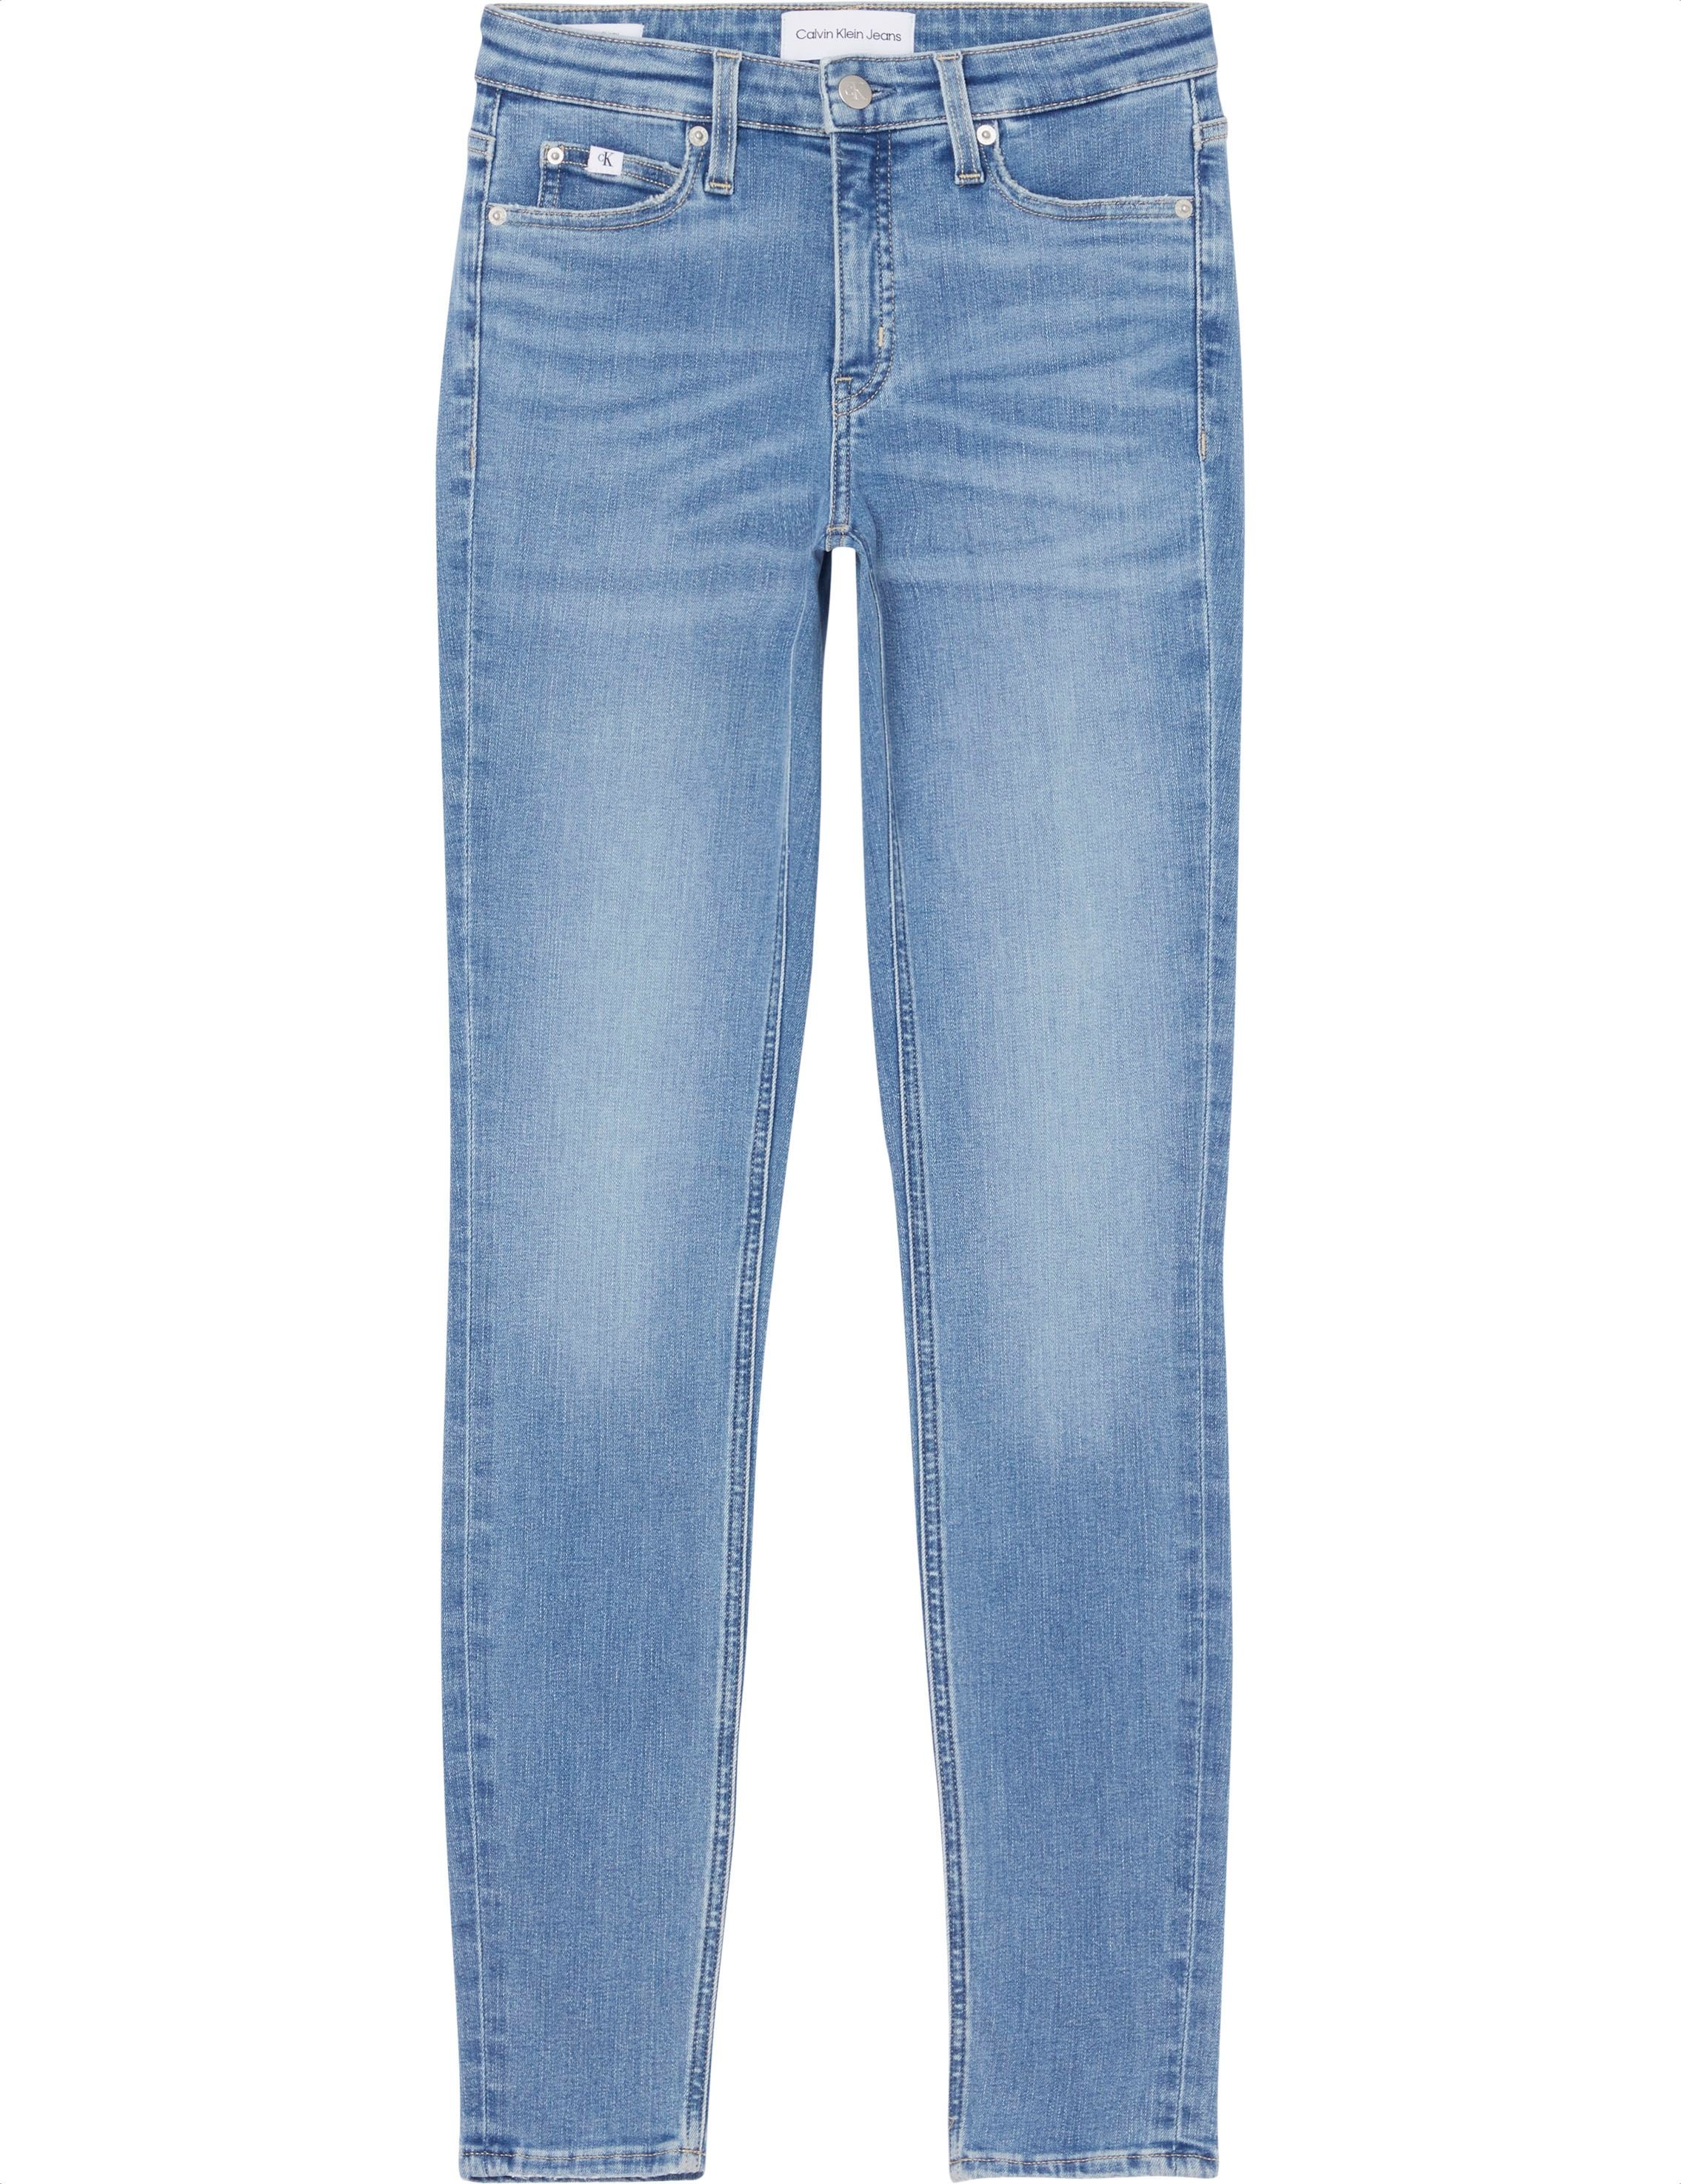 Calvin Klein online OTTO Jeans Skinny-fit-Jeans, 5-Pocket-Style im bei